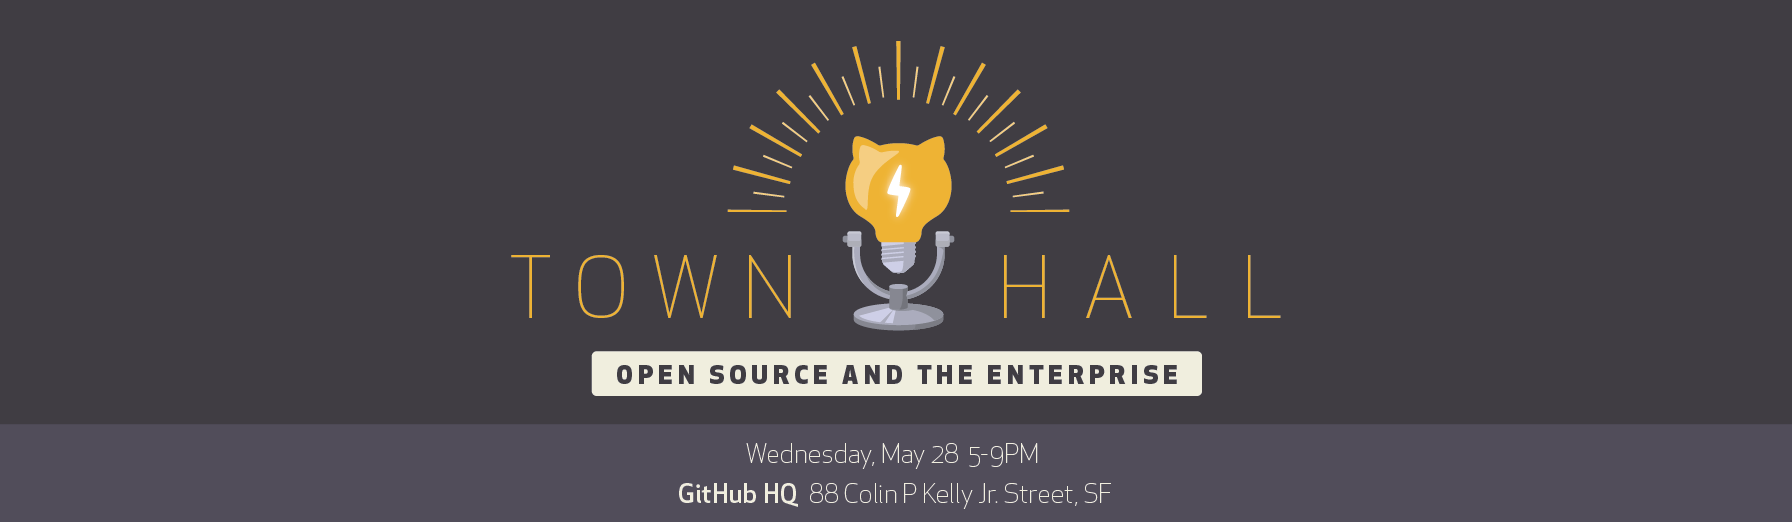 GitHub Town Hall: Open Source and the Enterprise